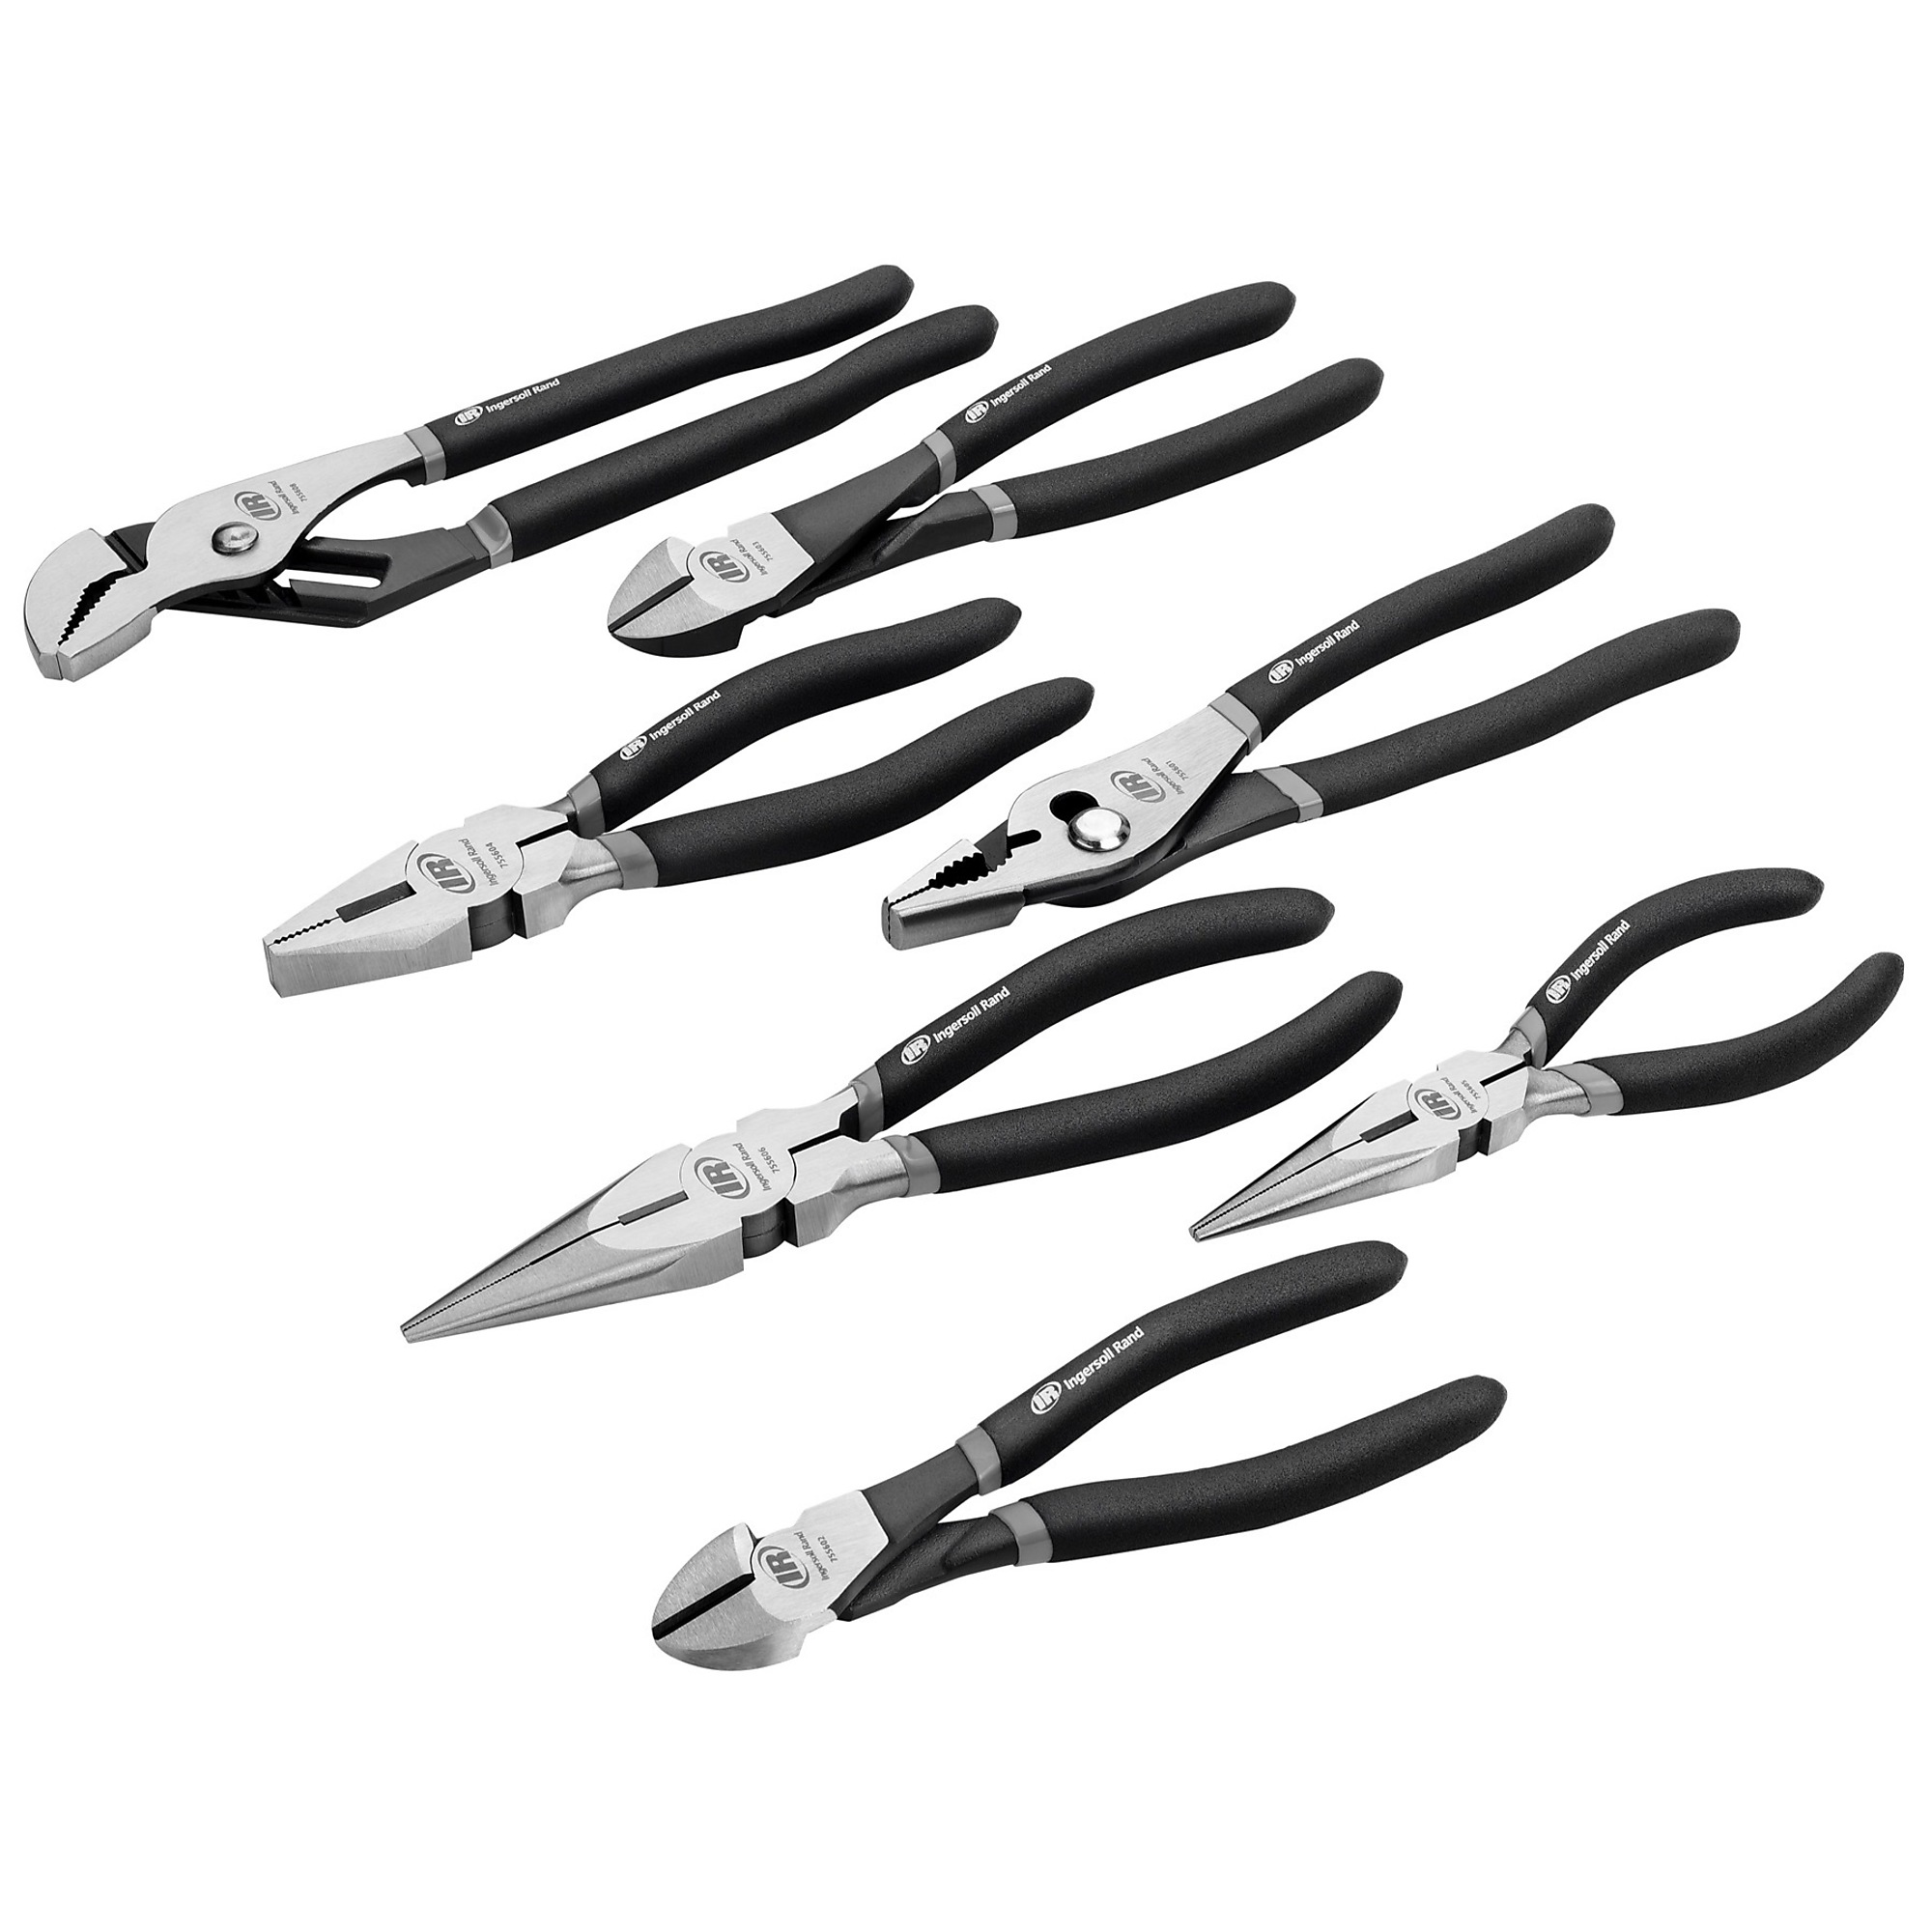 Ingersoll Rand, 7 Piece Master Pliers Set, Pieces (qty.) 7, Model